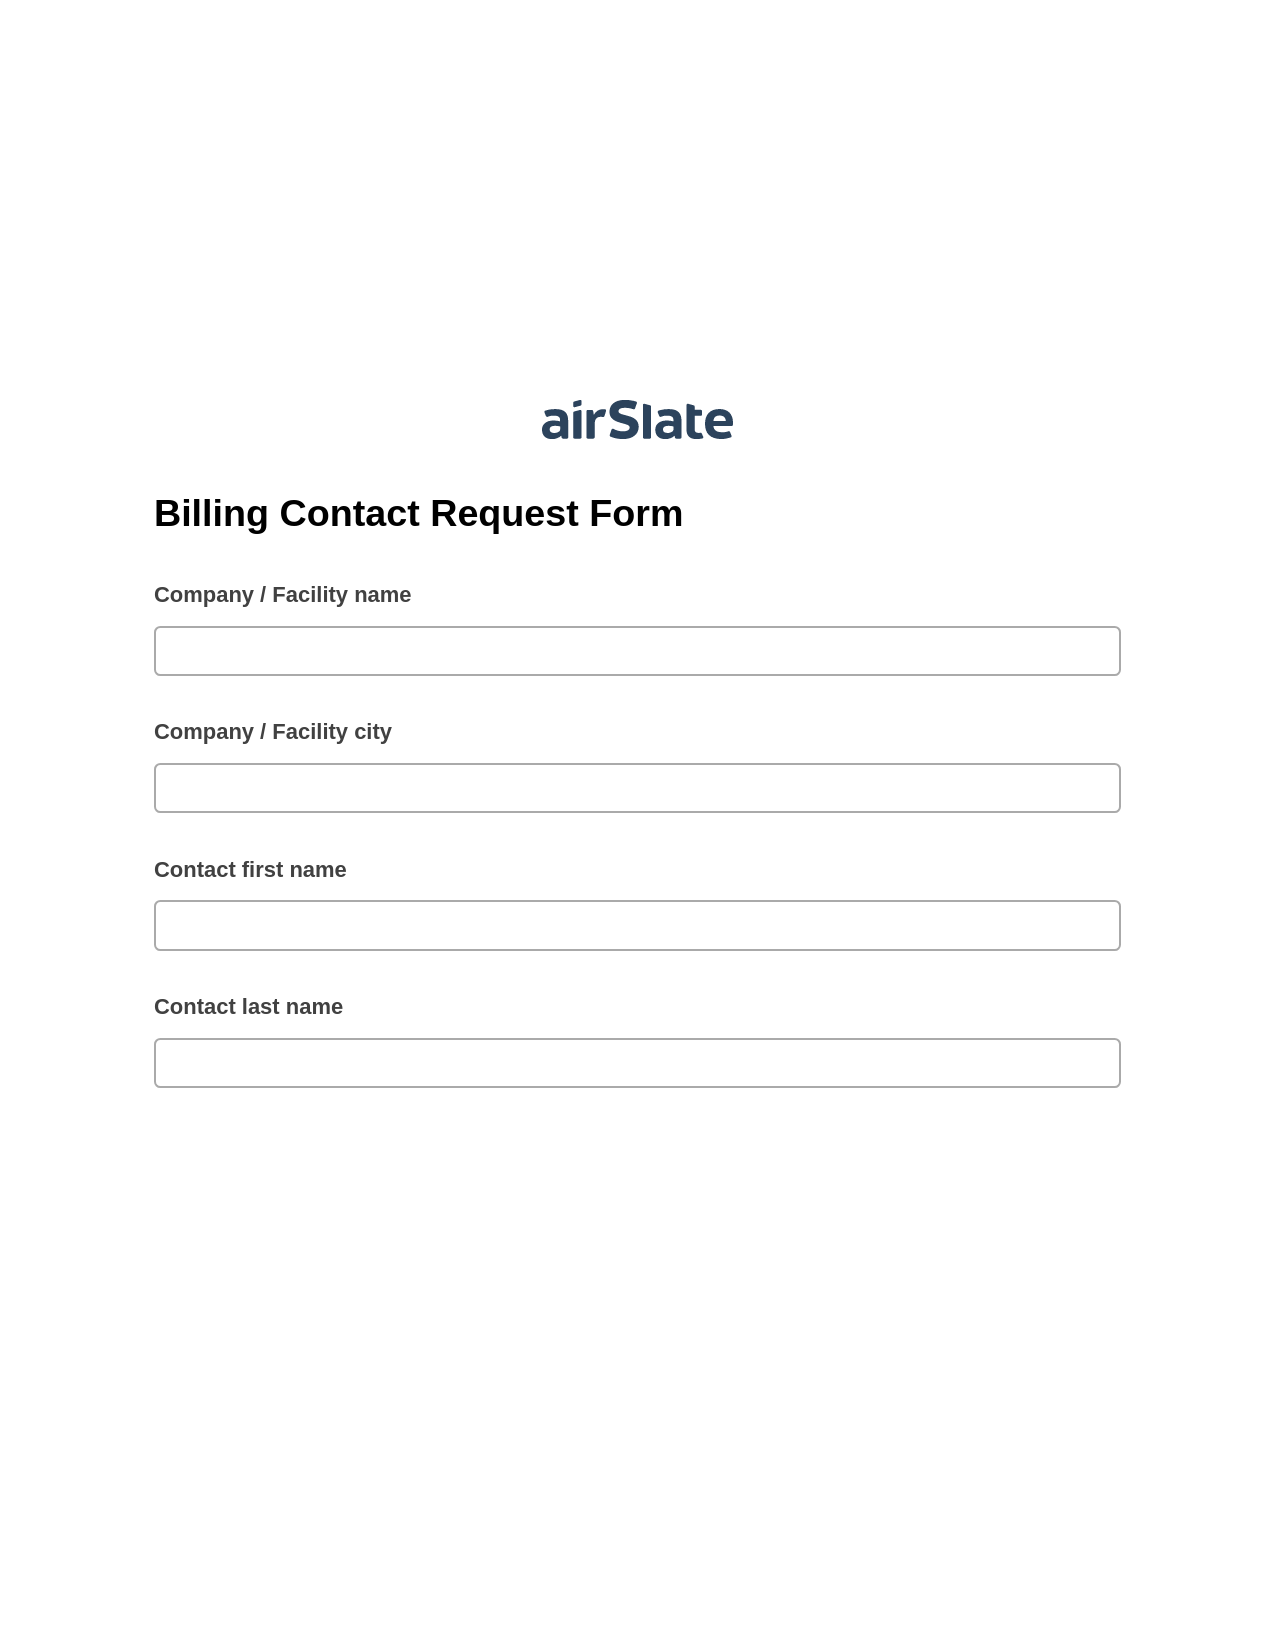 Multirole Billing Contact Request Form Pre-fill from another Slate Bot, Jira Bot, Export to Smartsheet